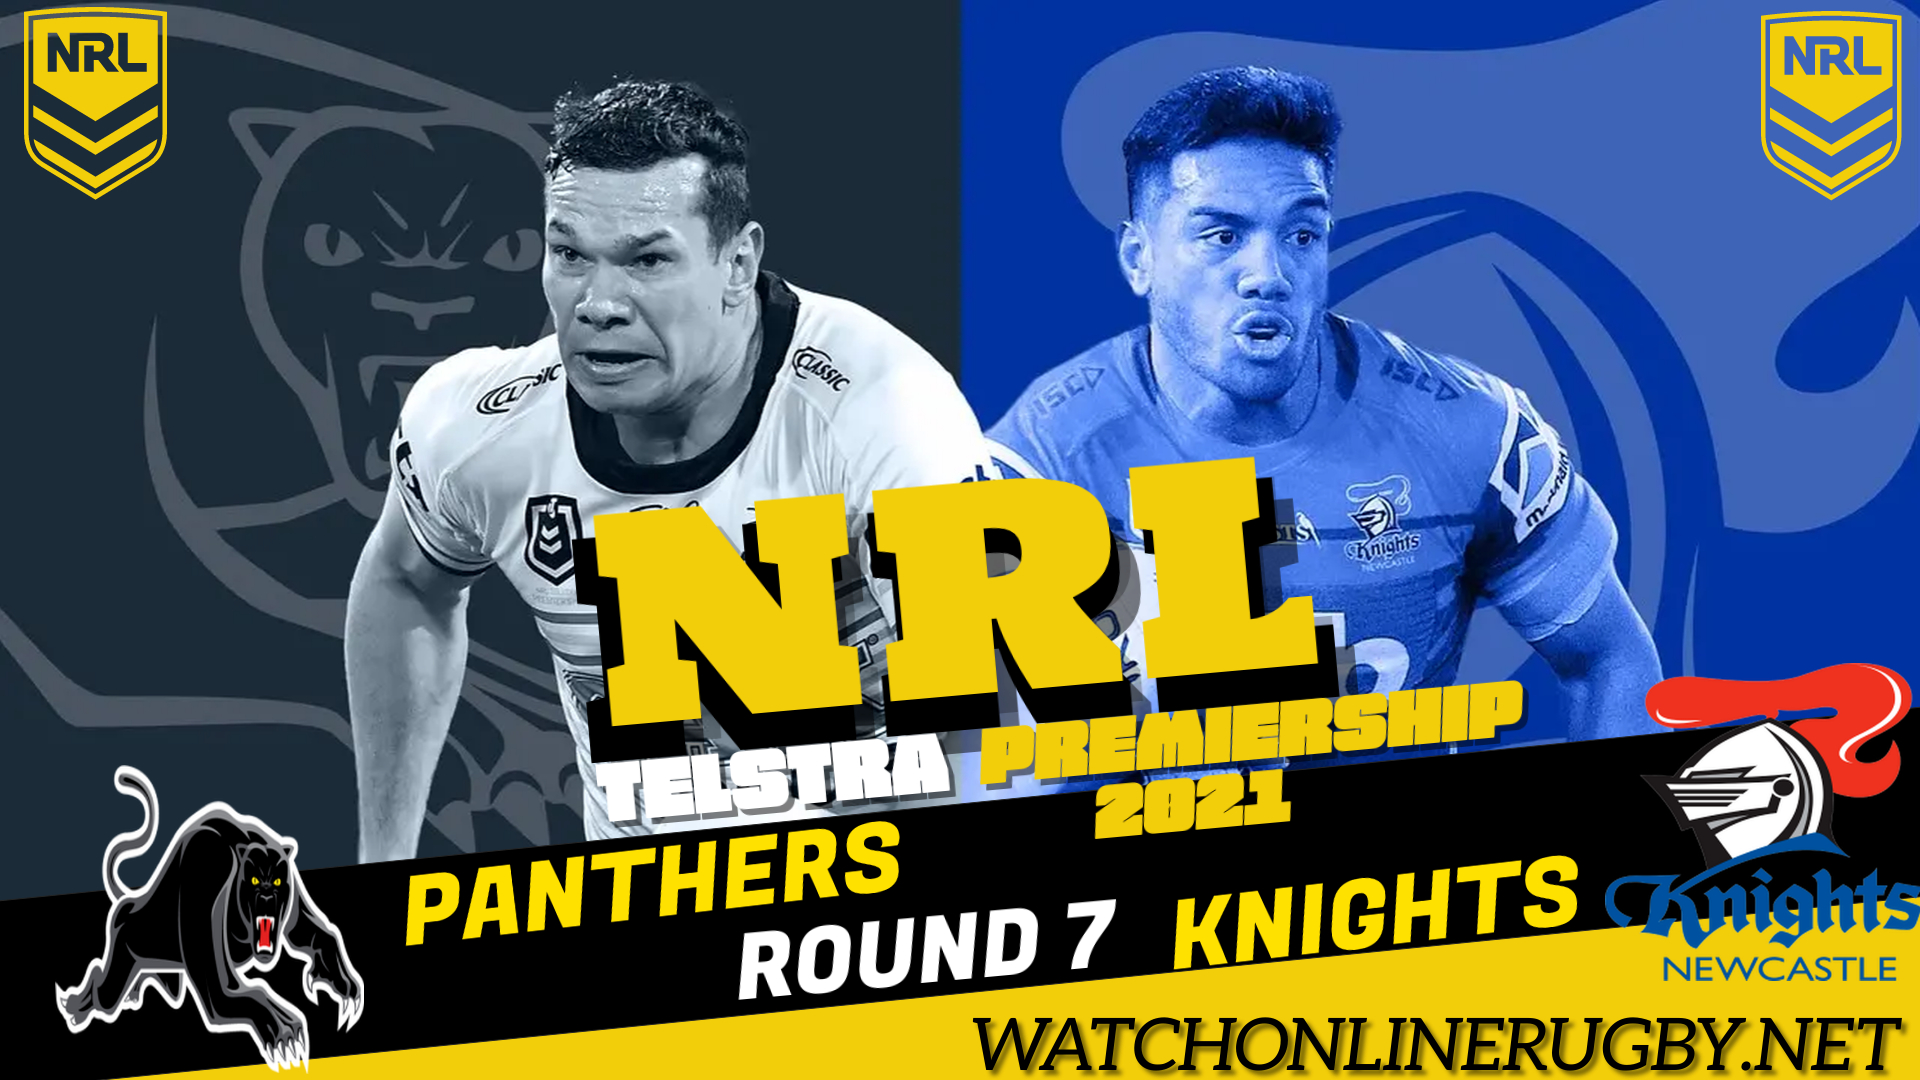 Panthers Vs Knights NRL Live